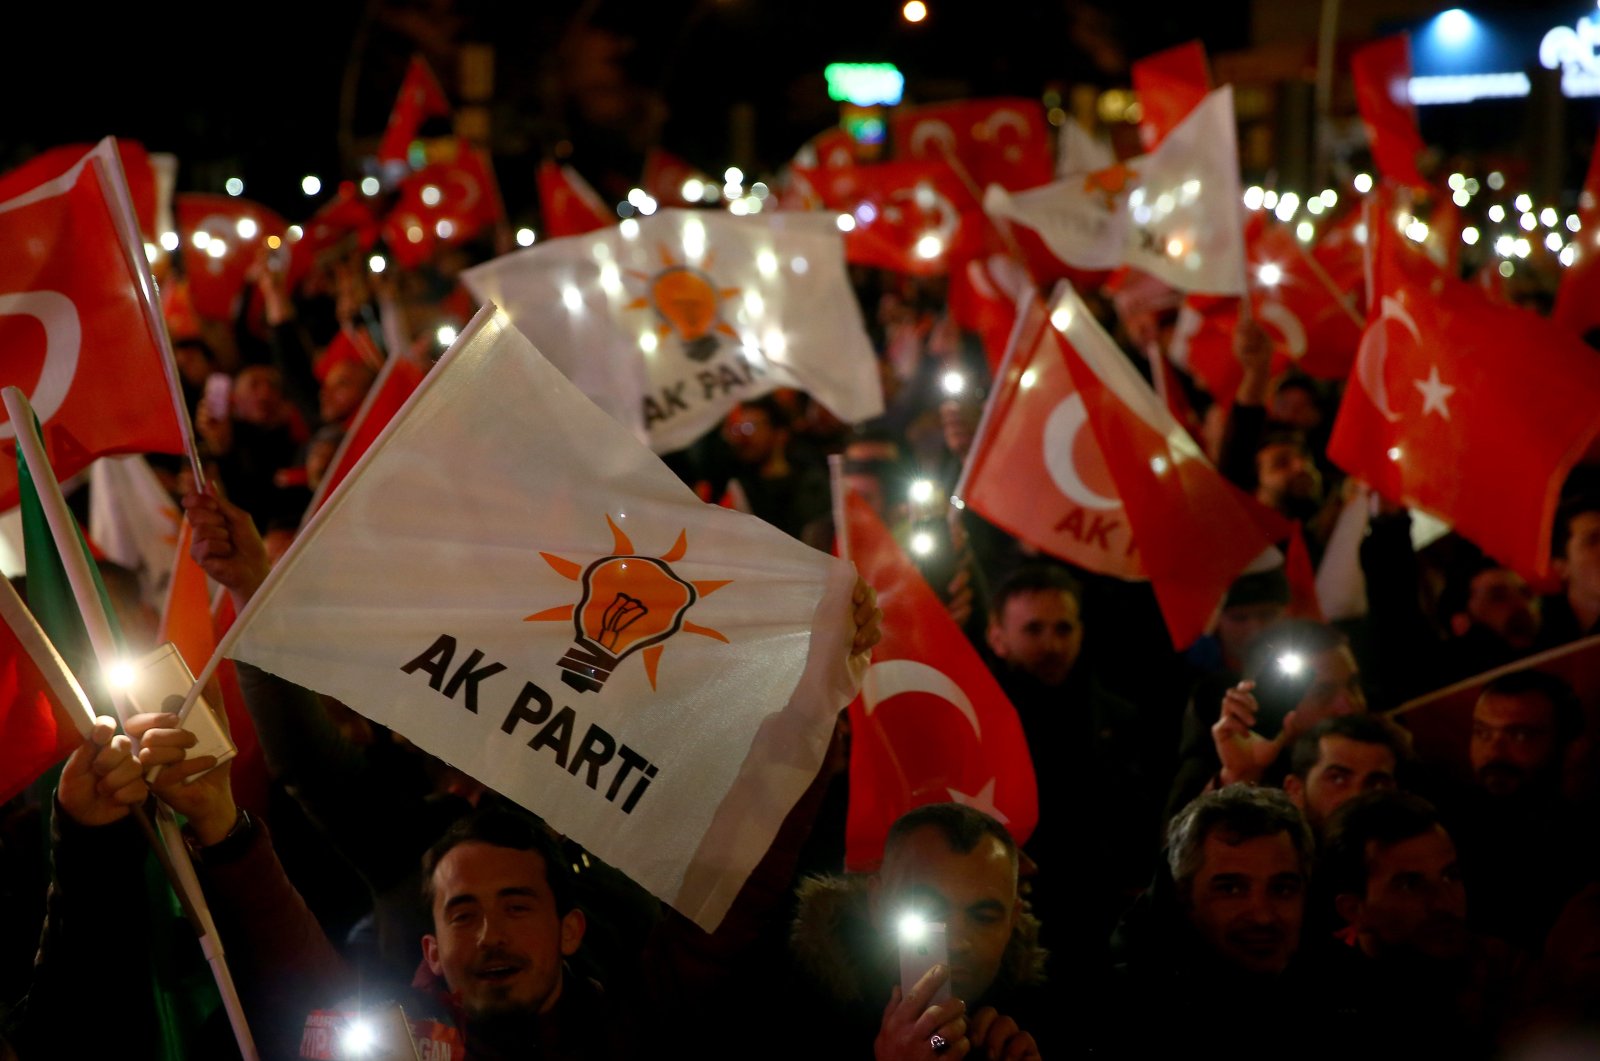 In this file photo, ruling Justice and Development Party (AK Party) supporters cheer during a speech by President Recep Tayyip Erdoğan, chairperson of the party, in the capital Ankara, Turkey, April 2, 2019.